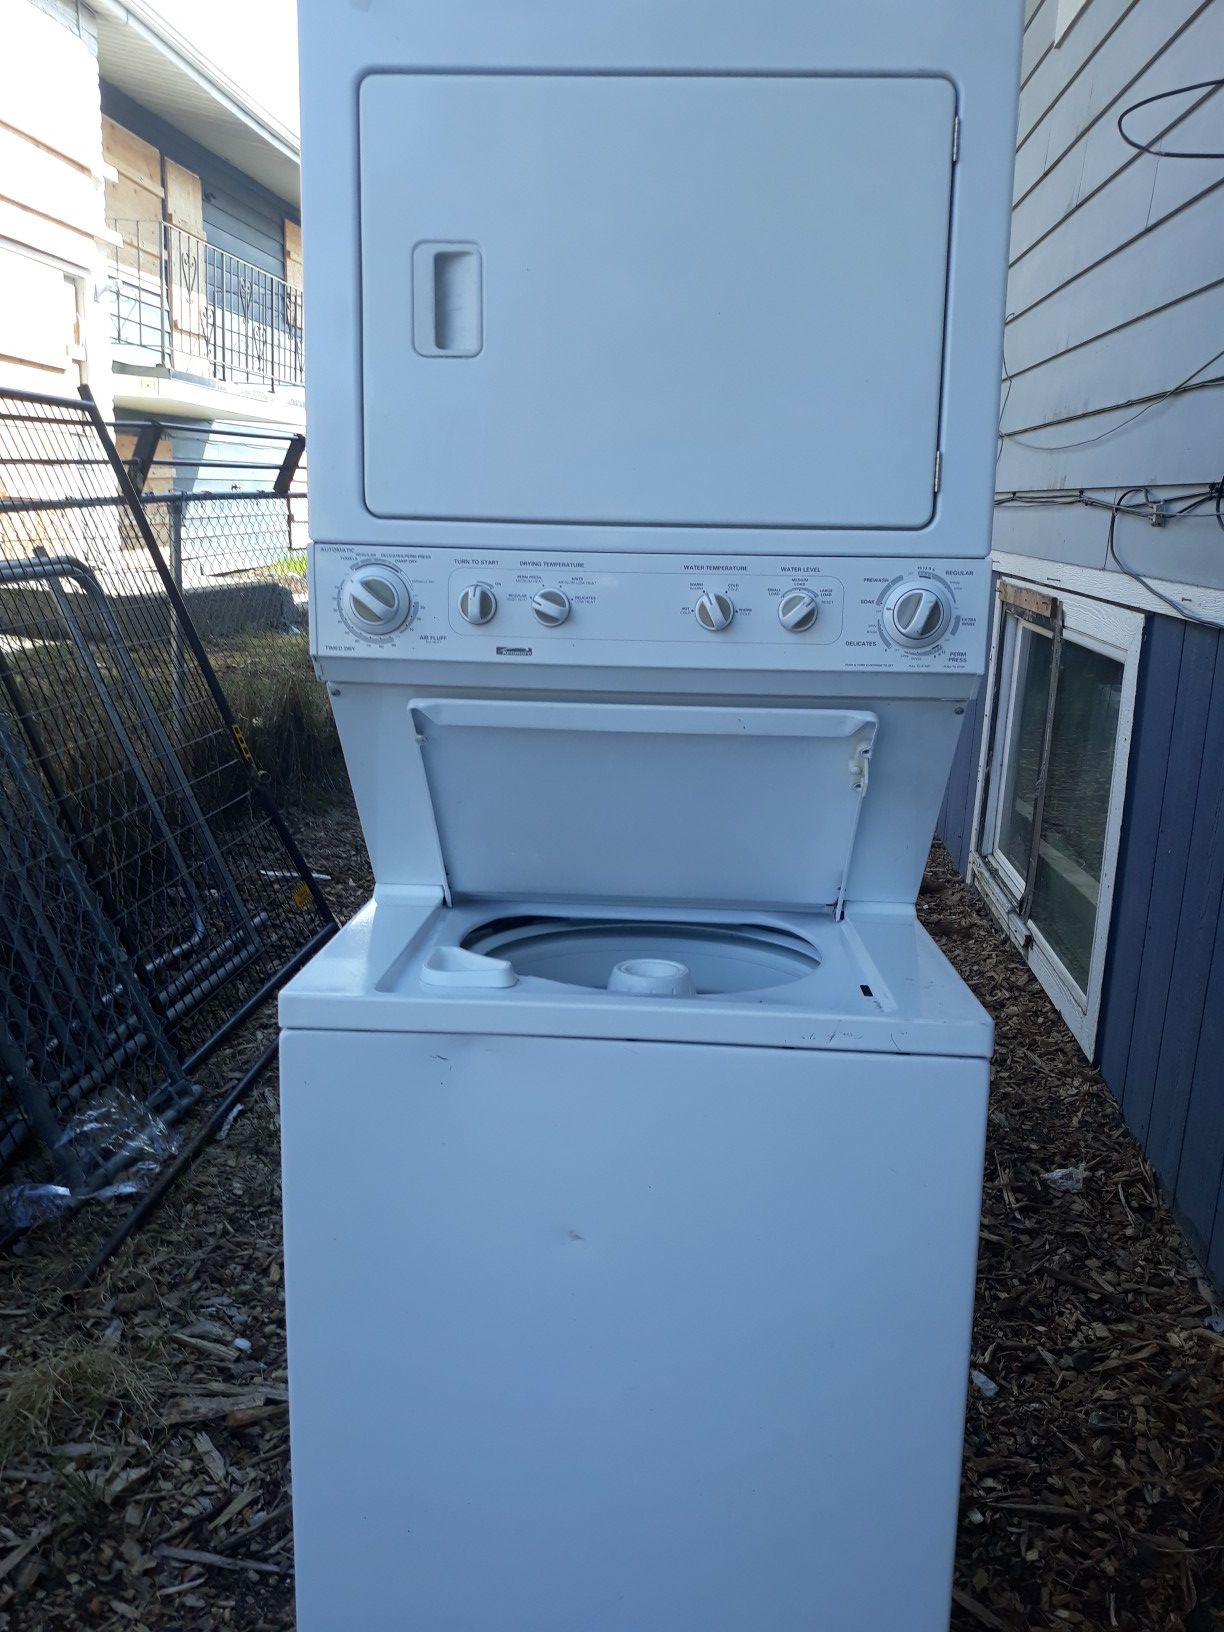 Whirlpool stacked washer/dryer